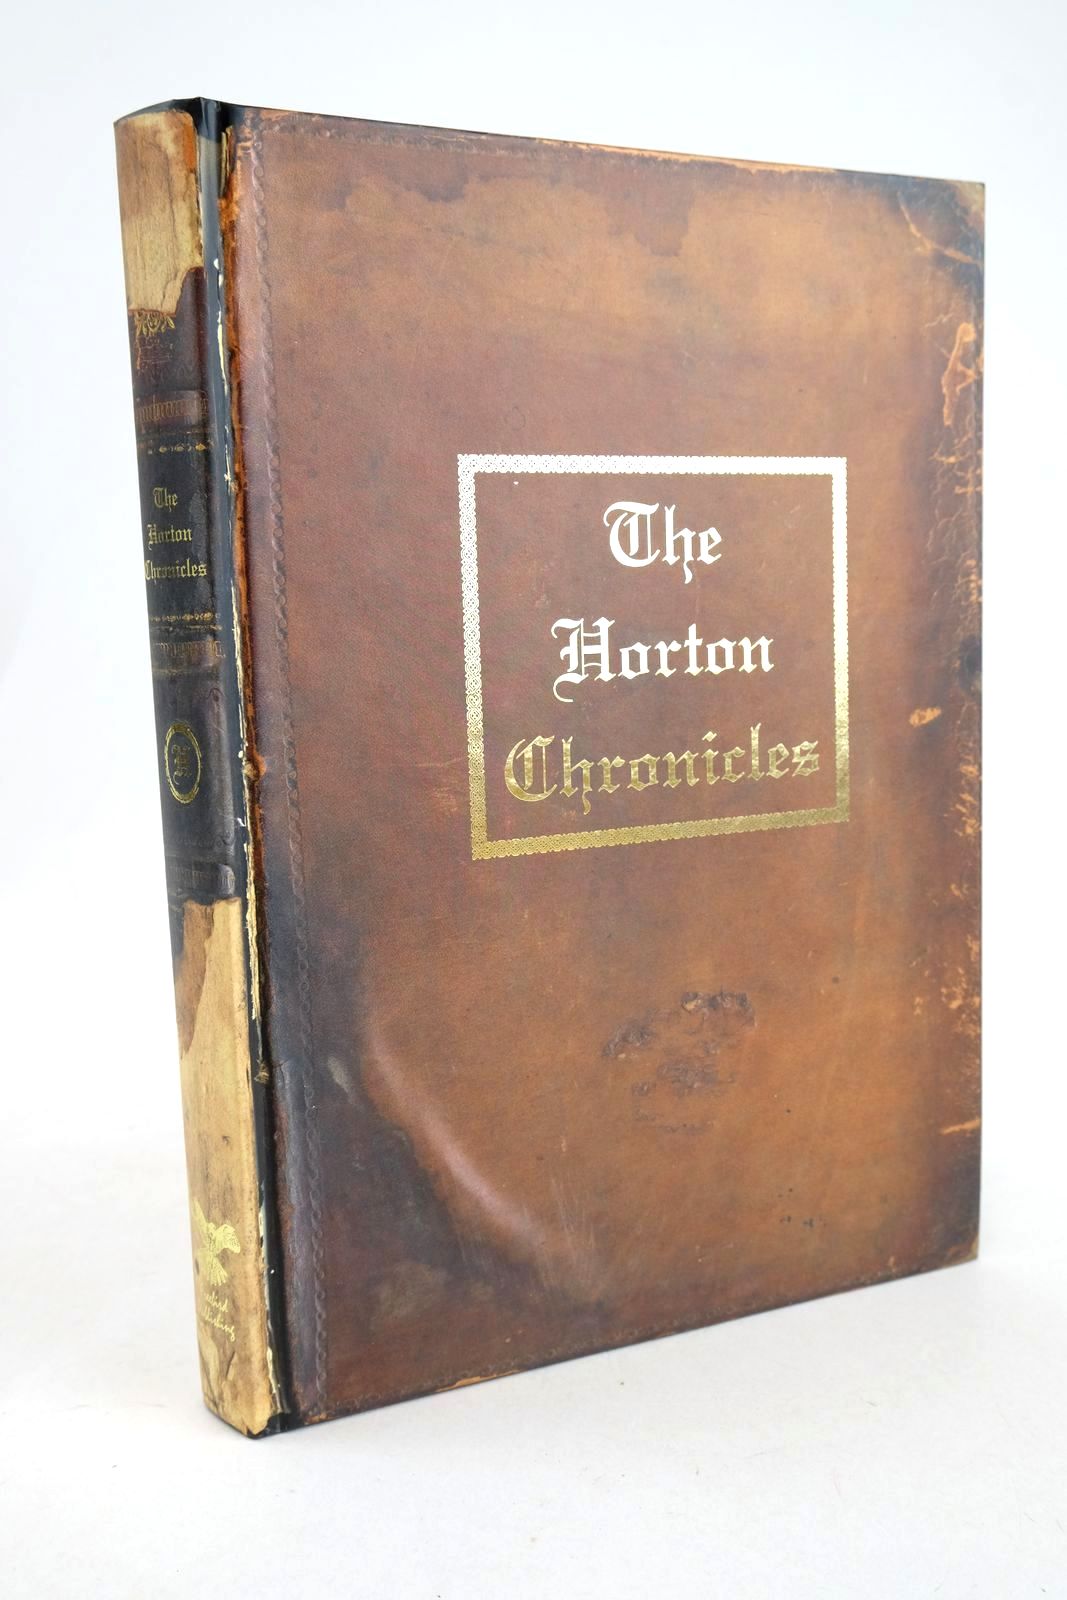 Photo of THE HORTON CHRONICLES written by Moult, Johnny Rothwell, Stuart Lane, Dave et al, illustrated by Lane, Suzanne published by Freebird Publishing (STOCK CODE: 1327648)  for sale by Stella & Rose's Books